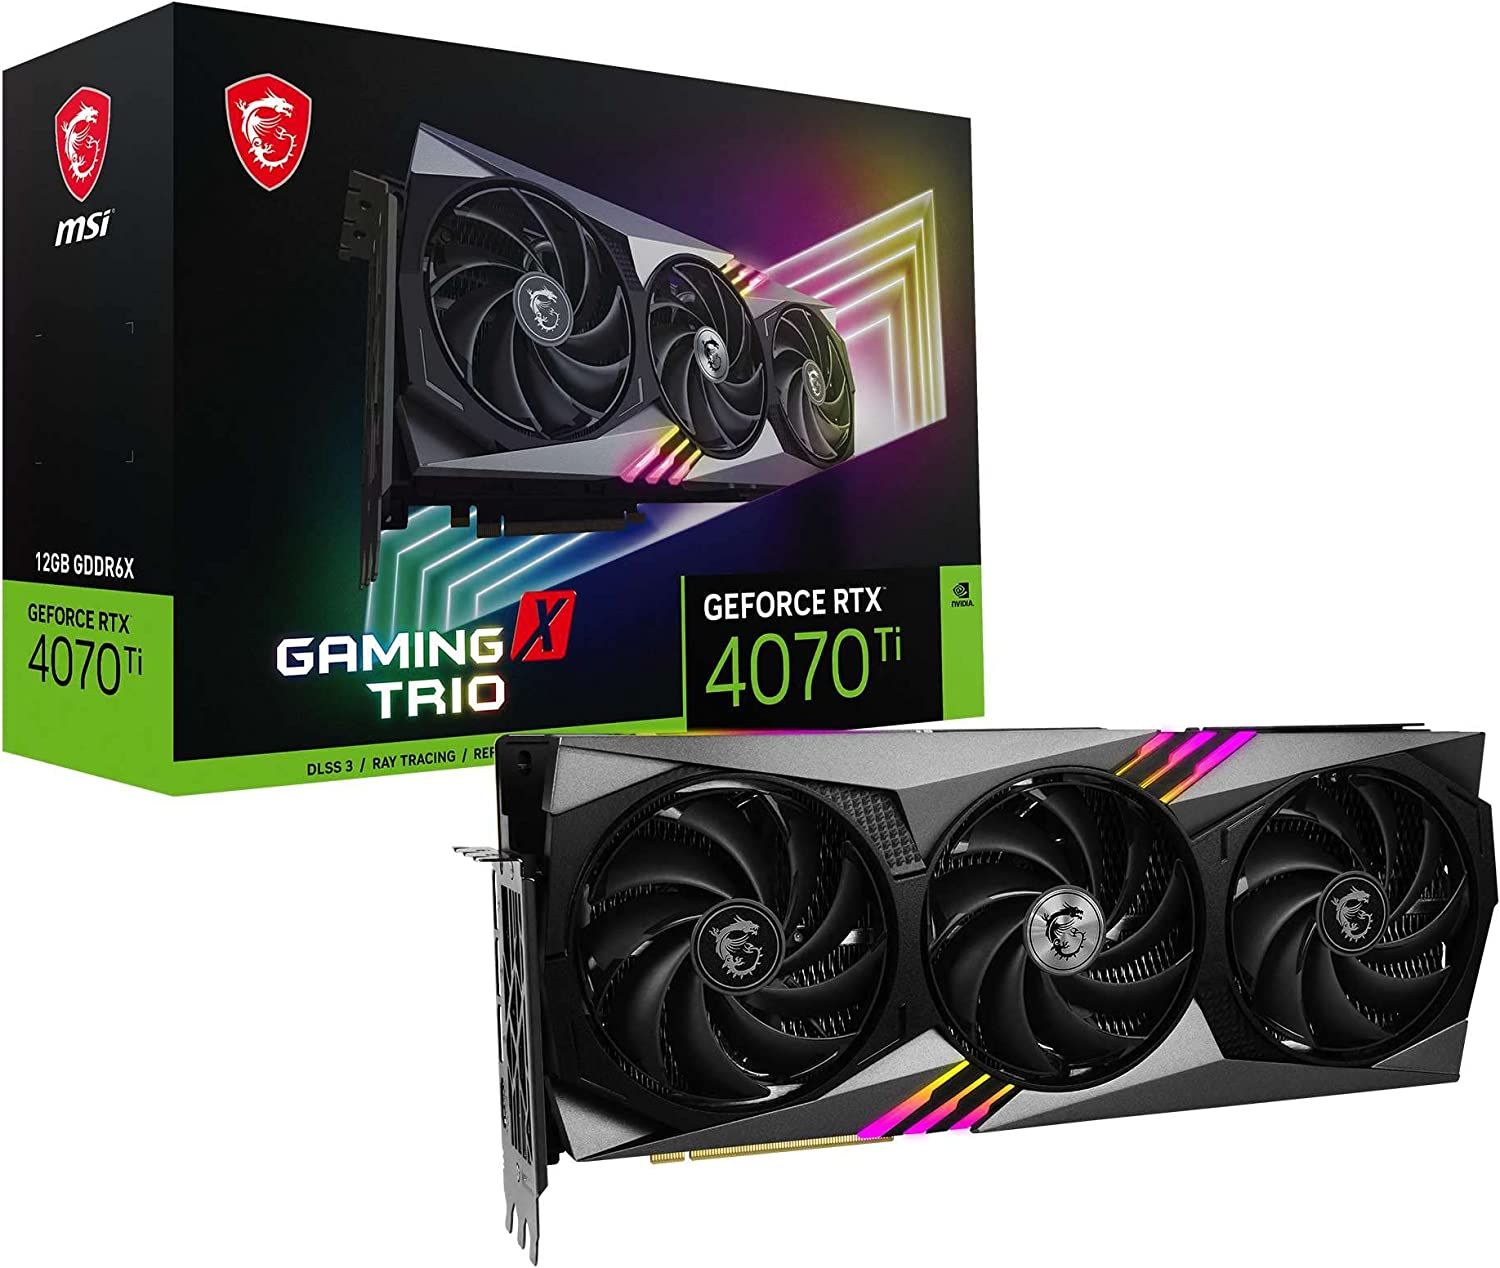 Could 3 months of FREE PC Game Pass and GeForce Now with ANY RTX 40-Series  graphics card purchase convince you to pick up NVIDIA's latest GPU?